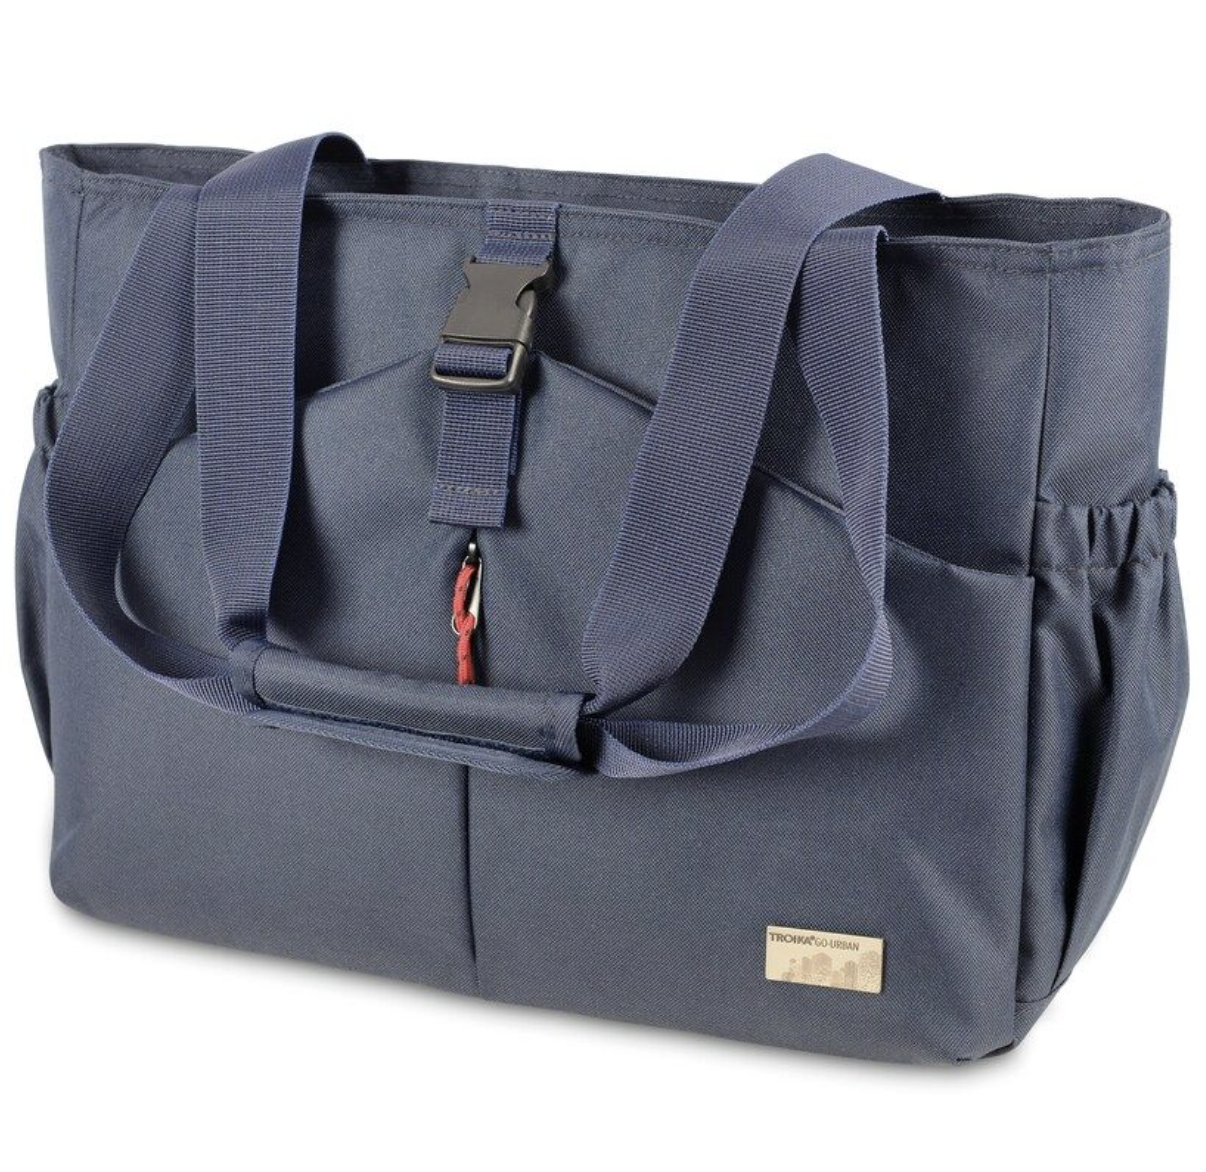 Urban Cooler Bag Made From Eco-friendly Recycled rPET